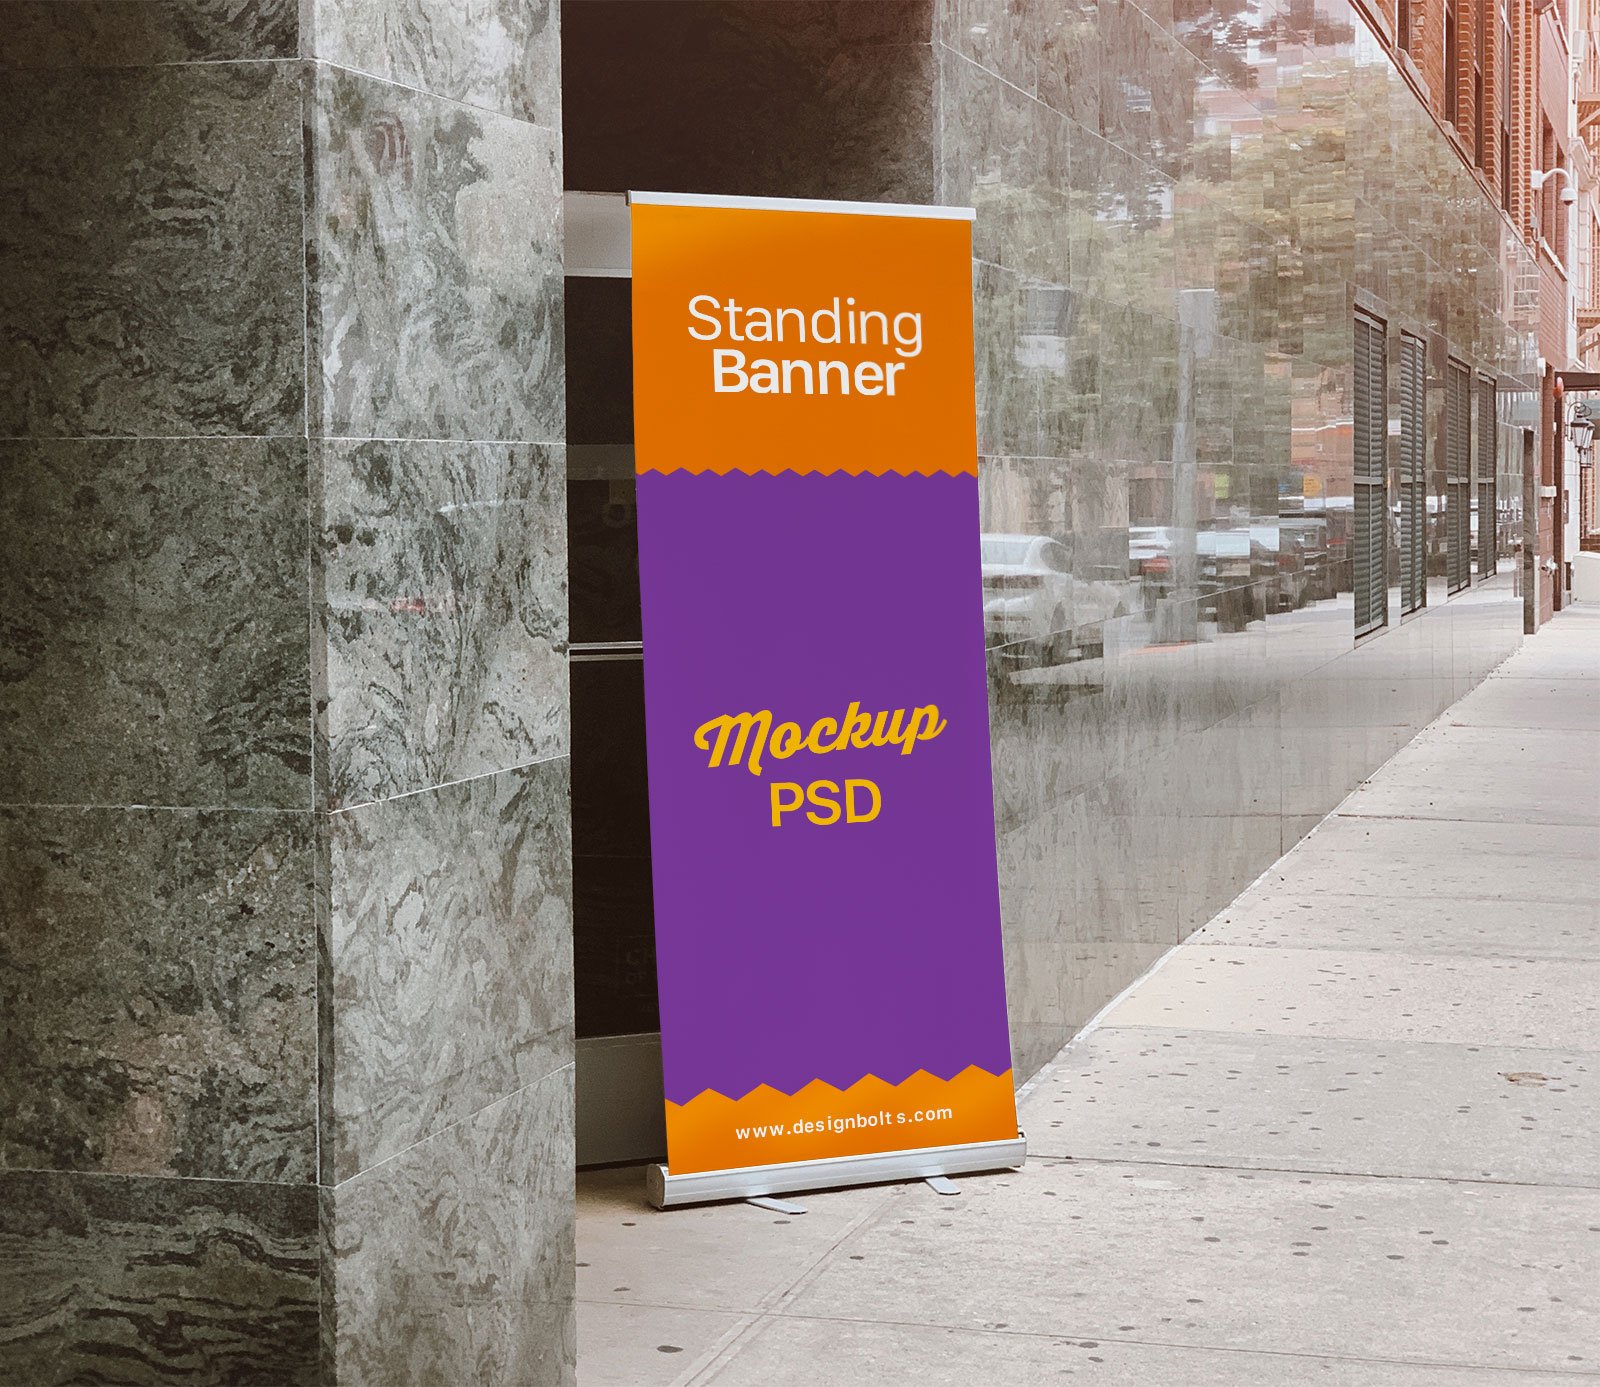 free-outdoor-advertising-standing-banner-on-road-mockup-psd-designbolts